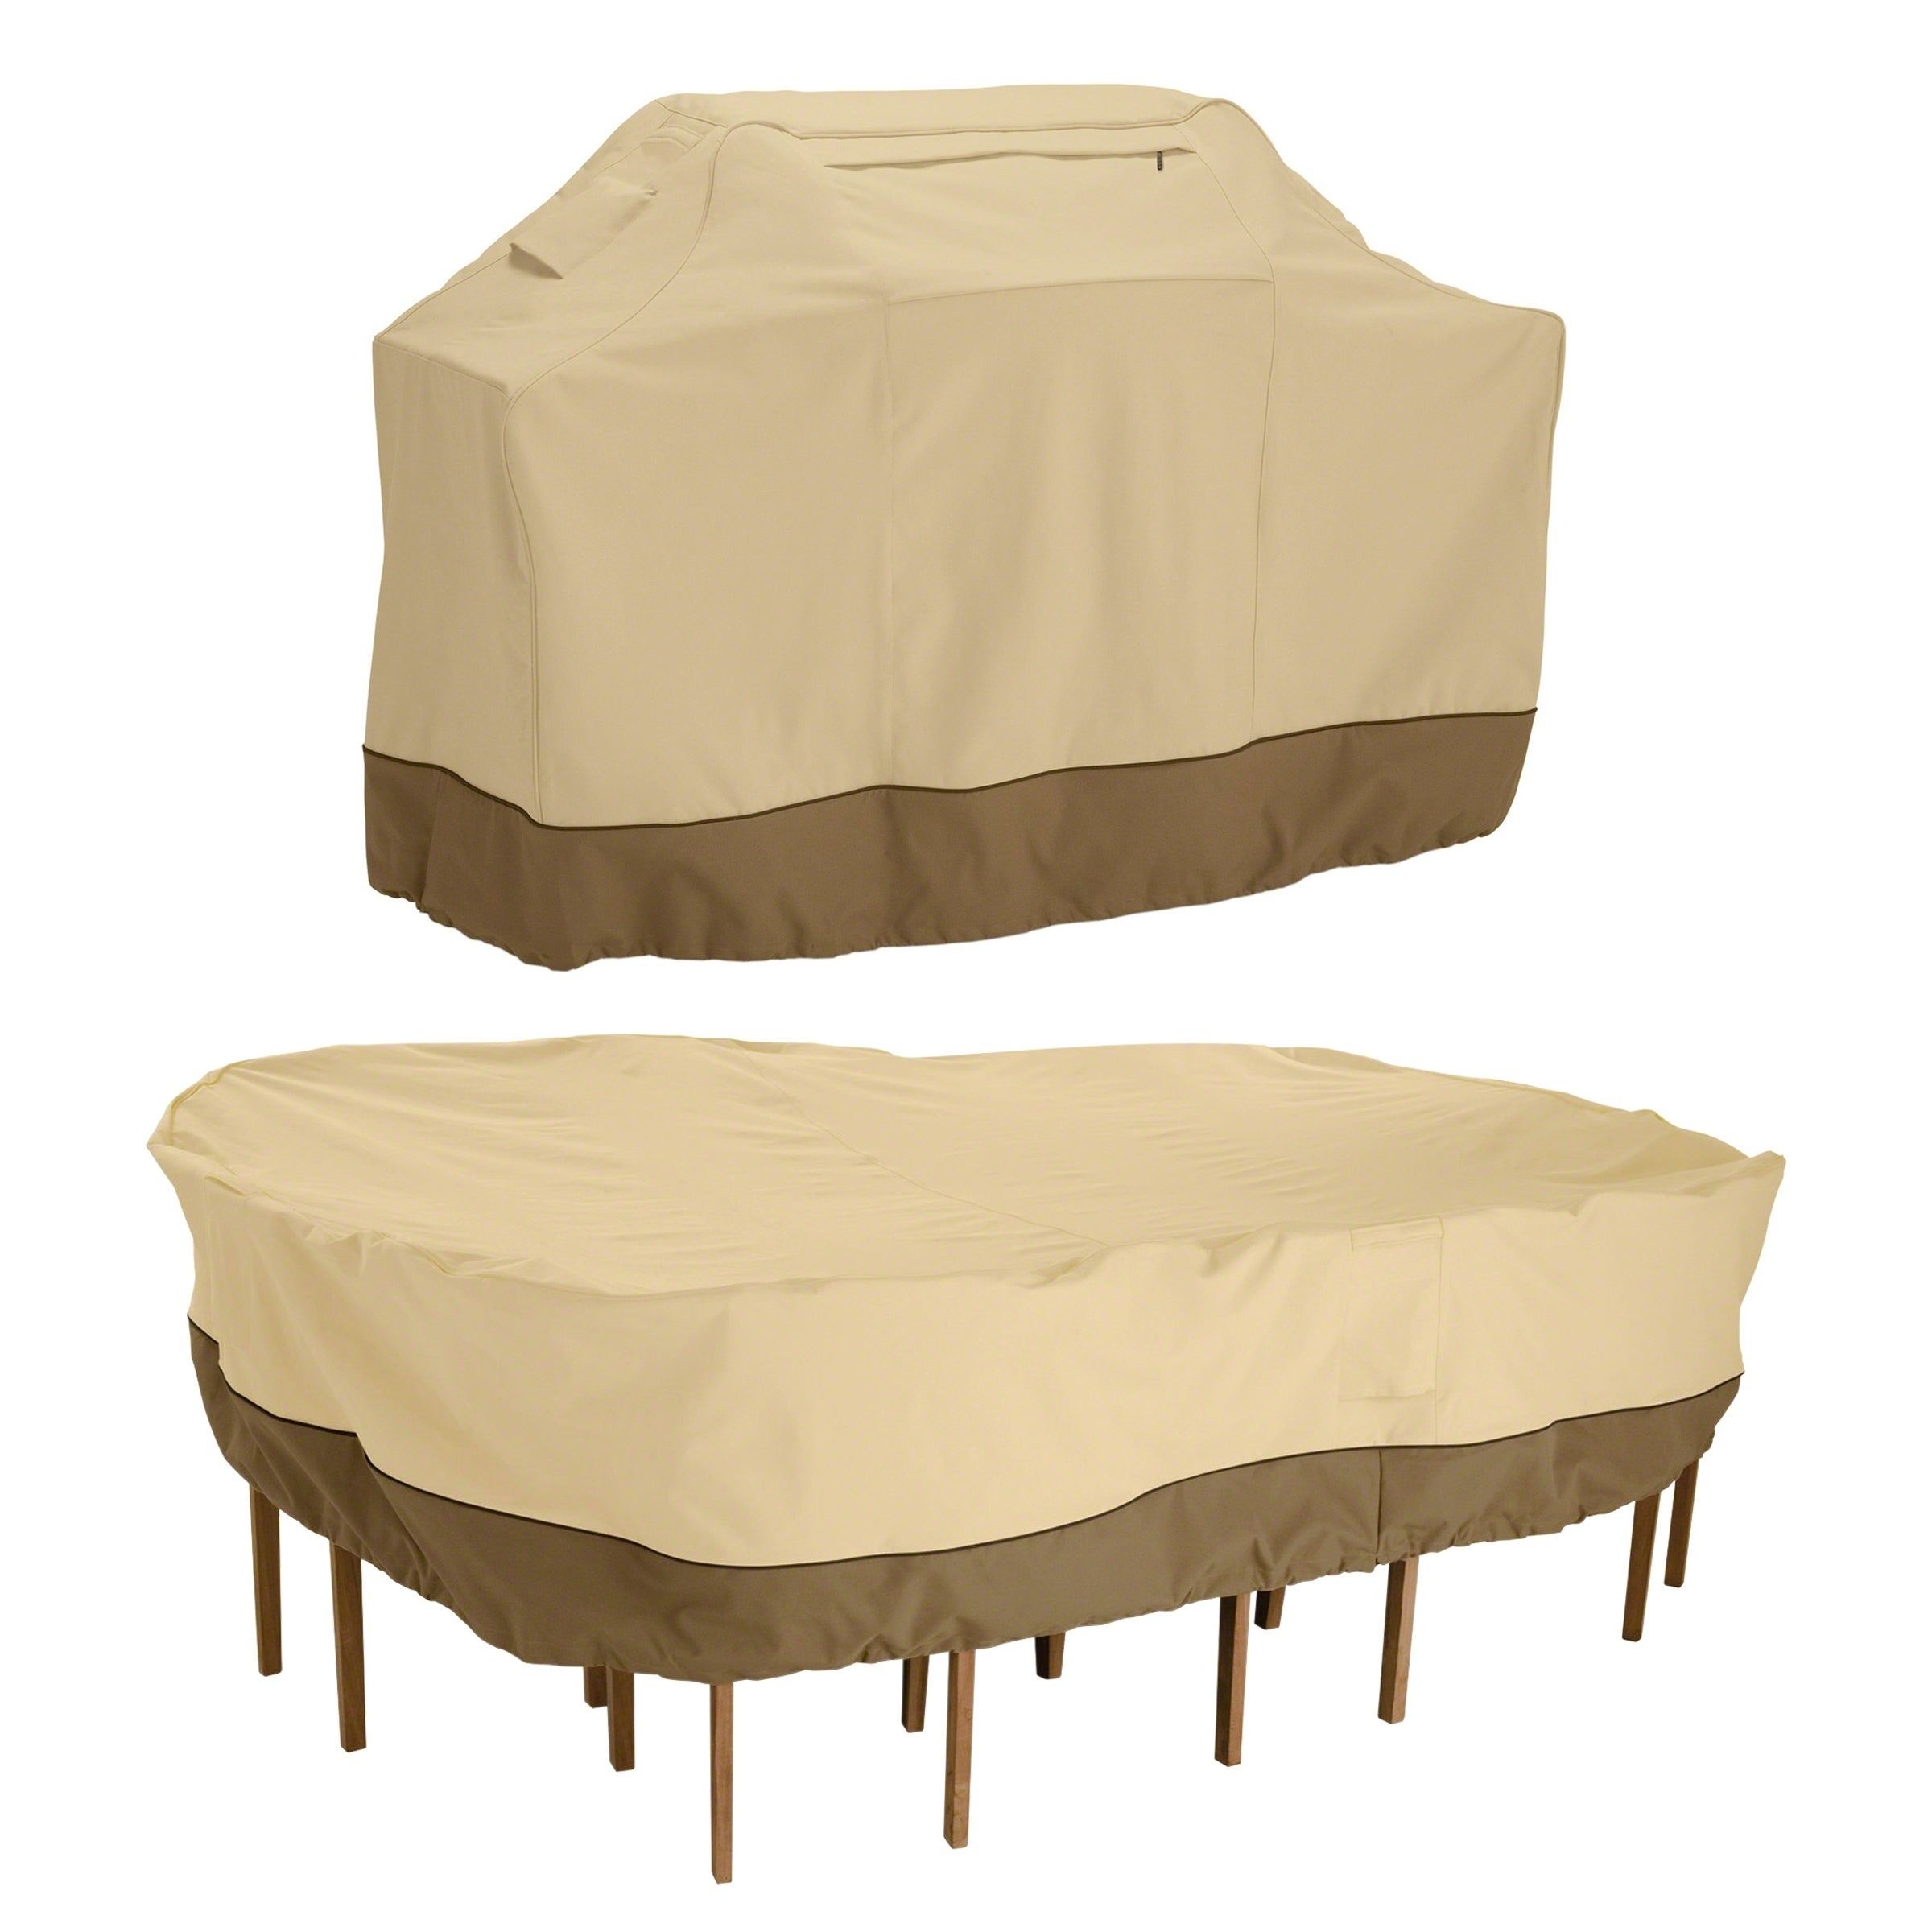 Durable And Water Resistant Outdoor Furniture Cover Medium pertaining to proportions 2400 X 2400